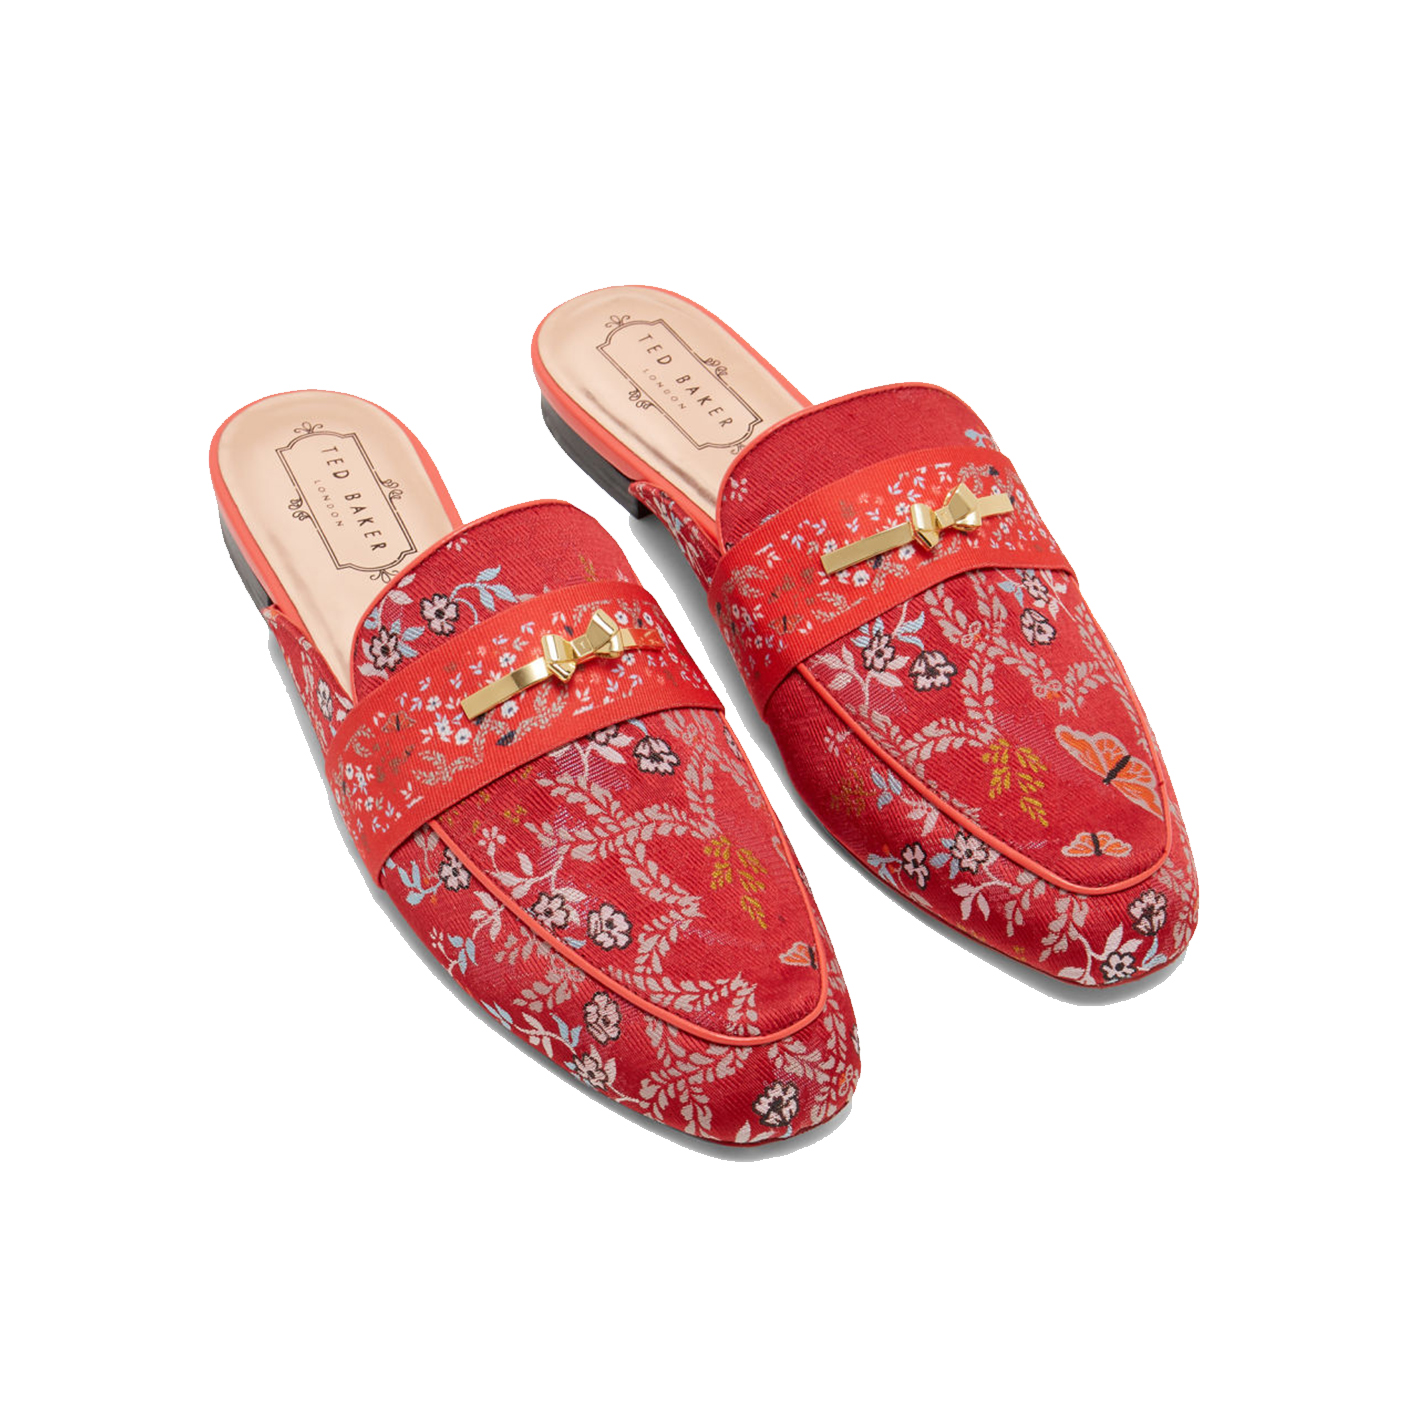 Backless Loafers in Kyoto Garden, £78, Ted Baker